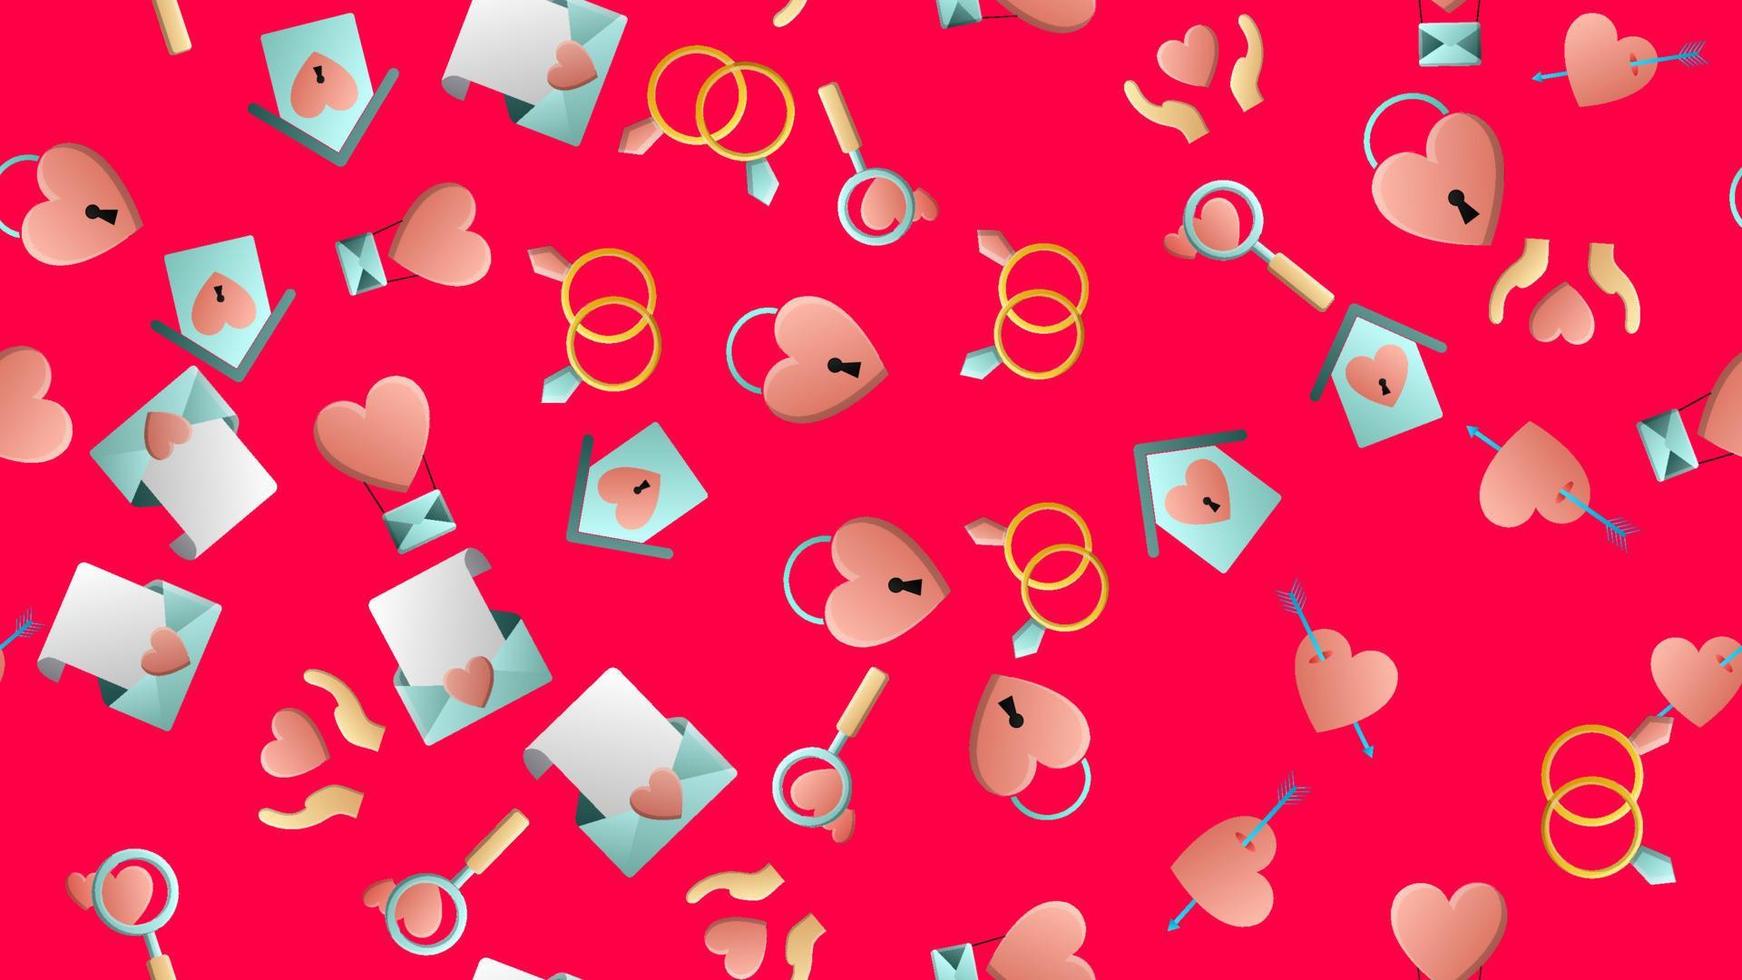 Endless seamless pattern of beautiful festive love joyful tender sets of heart objects with magnifying glasses houses arrows and letters on a red background. Vector illustration